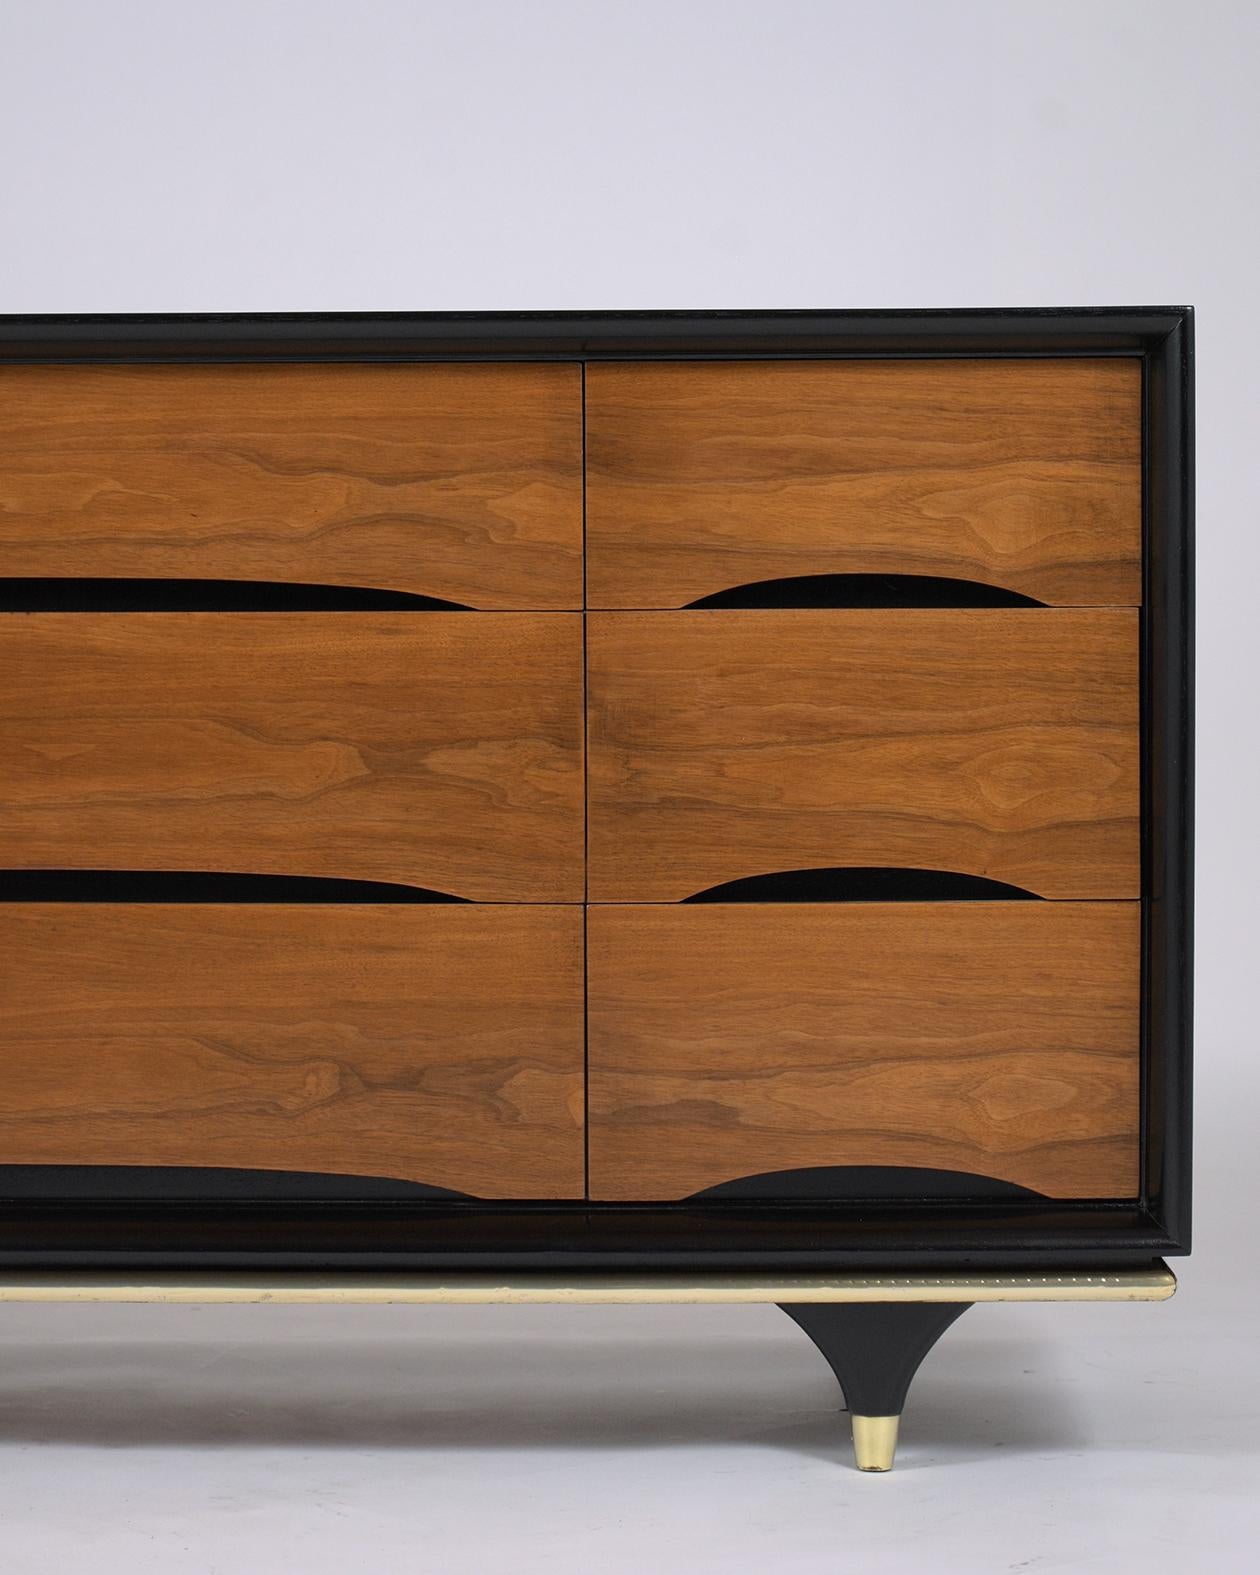 American Vintage Walnut Chest of Drawers: Mid-Century Elegance with Brass Accents